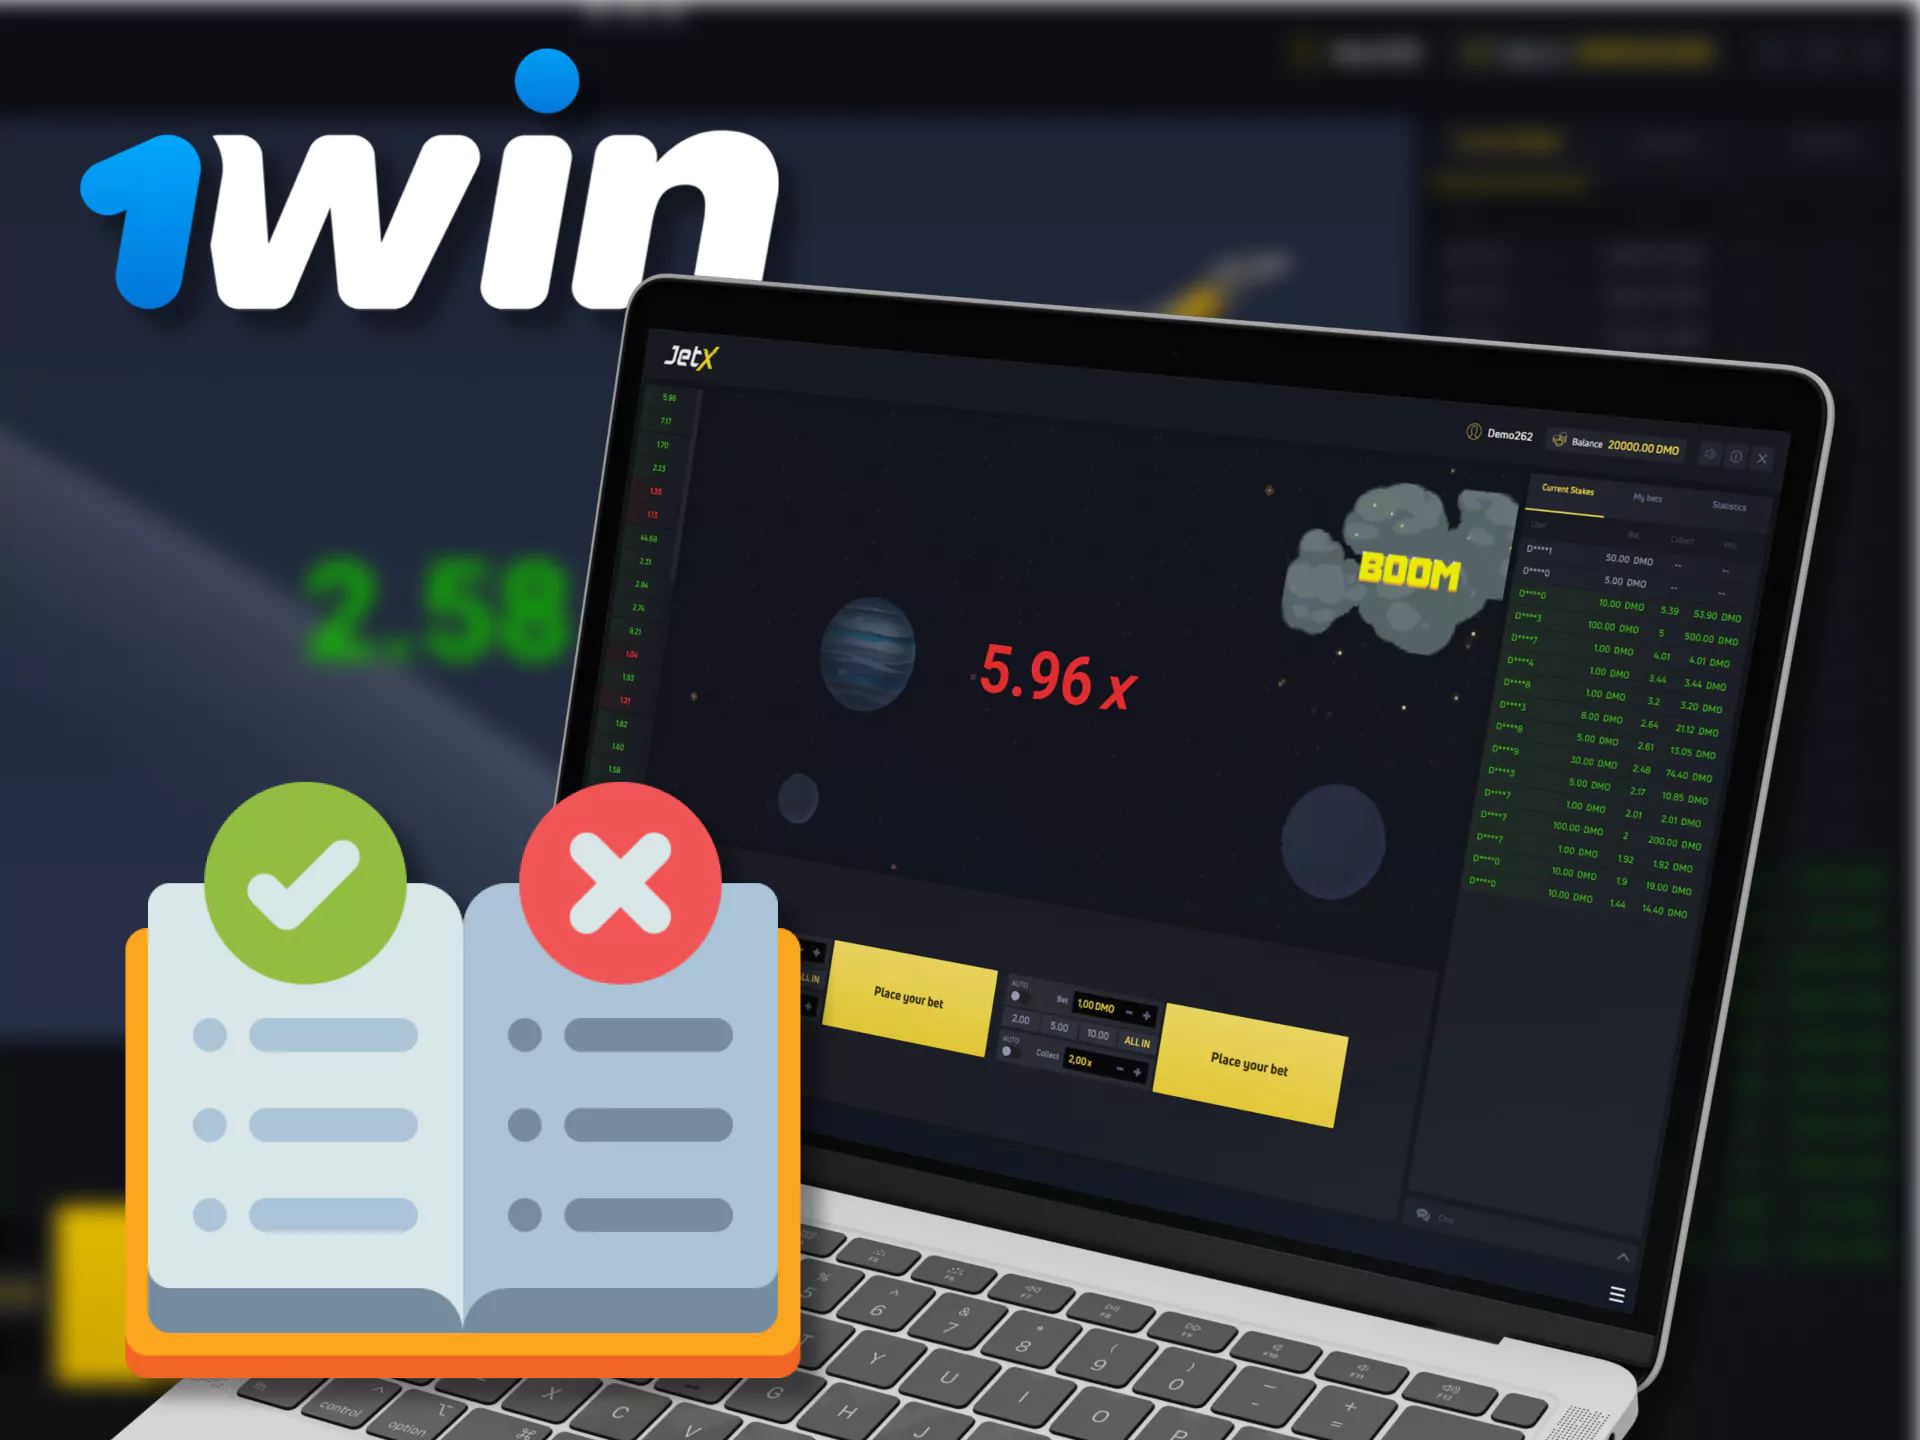 Learn the rules of JetX on 1Win.